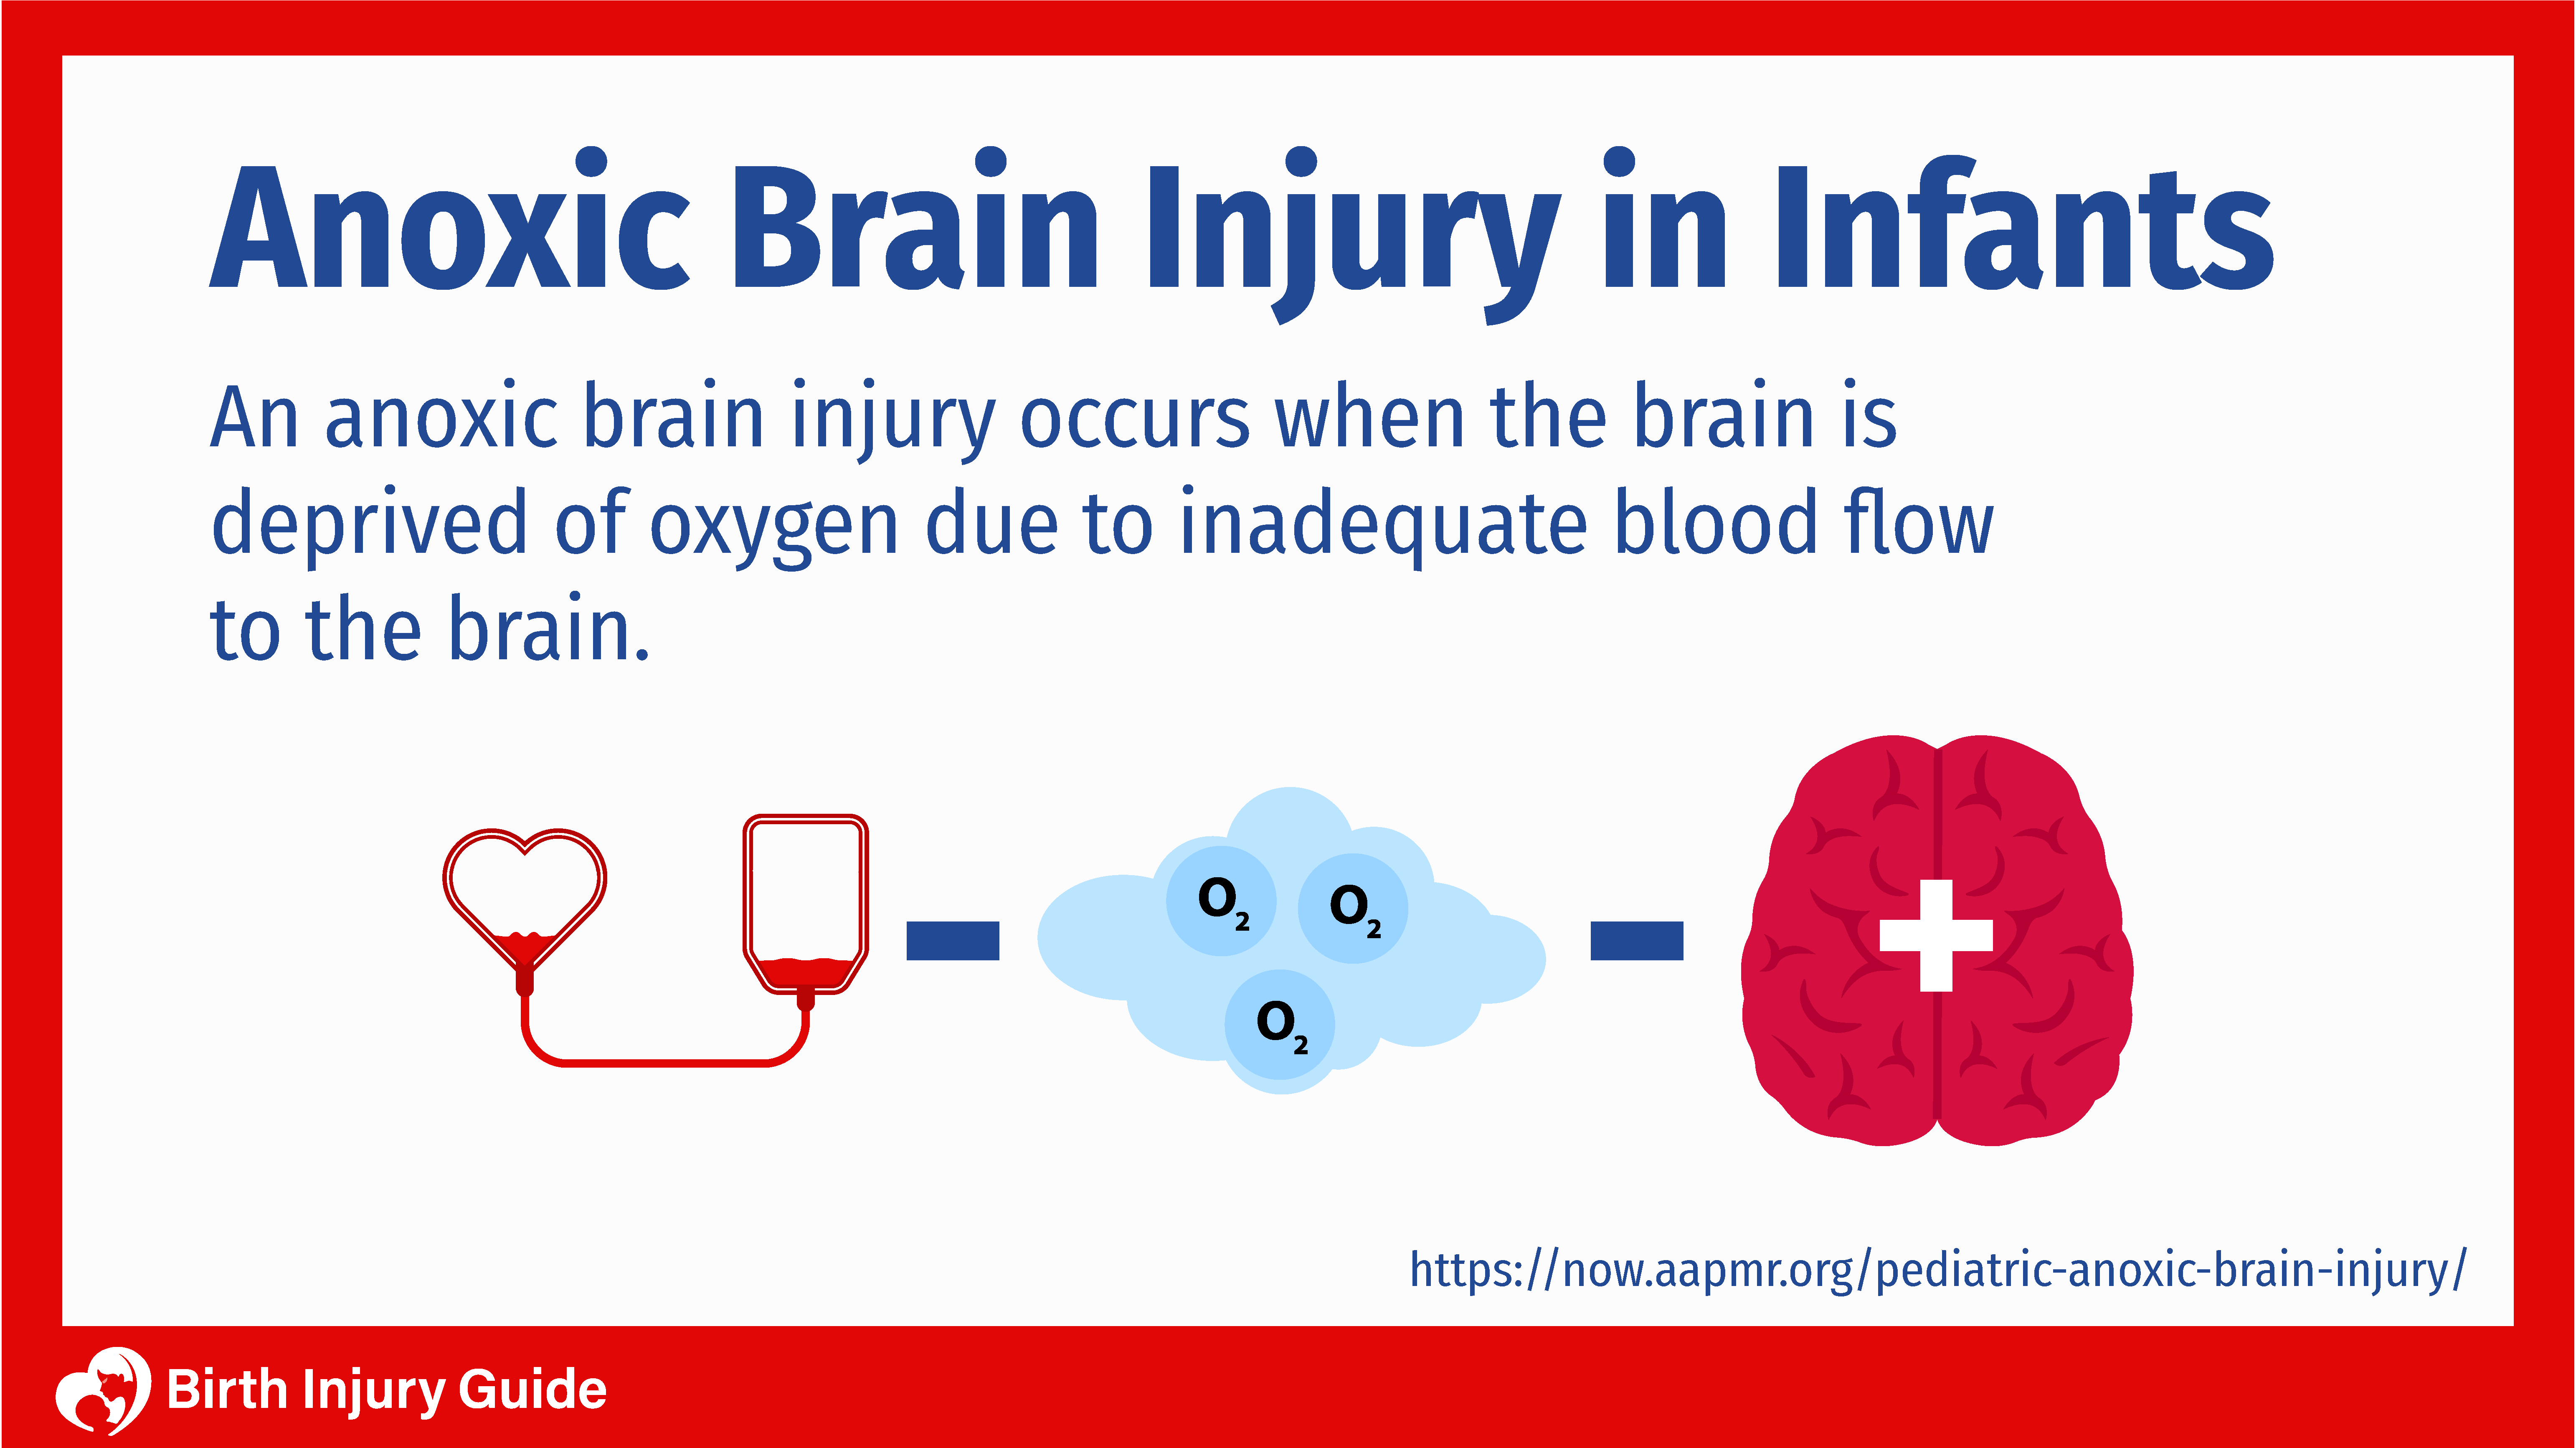 Description of when anoxic brain injury in infants occurs. Descriptive image showing lack of blood and oxygen to the brain.